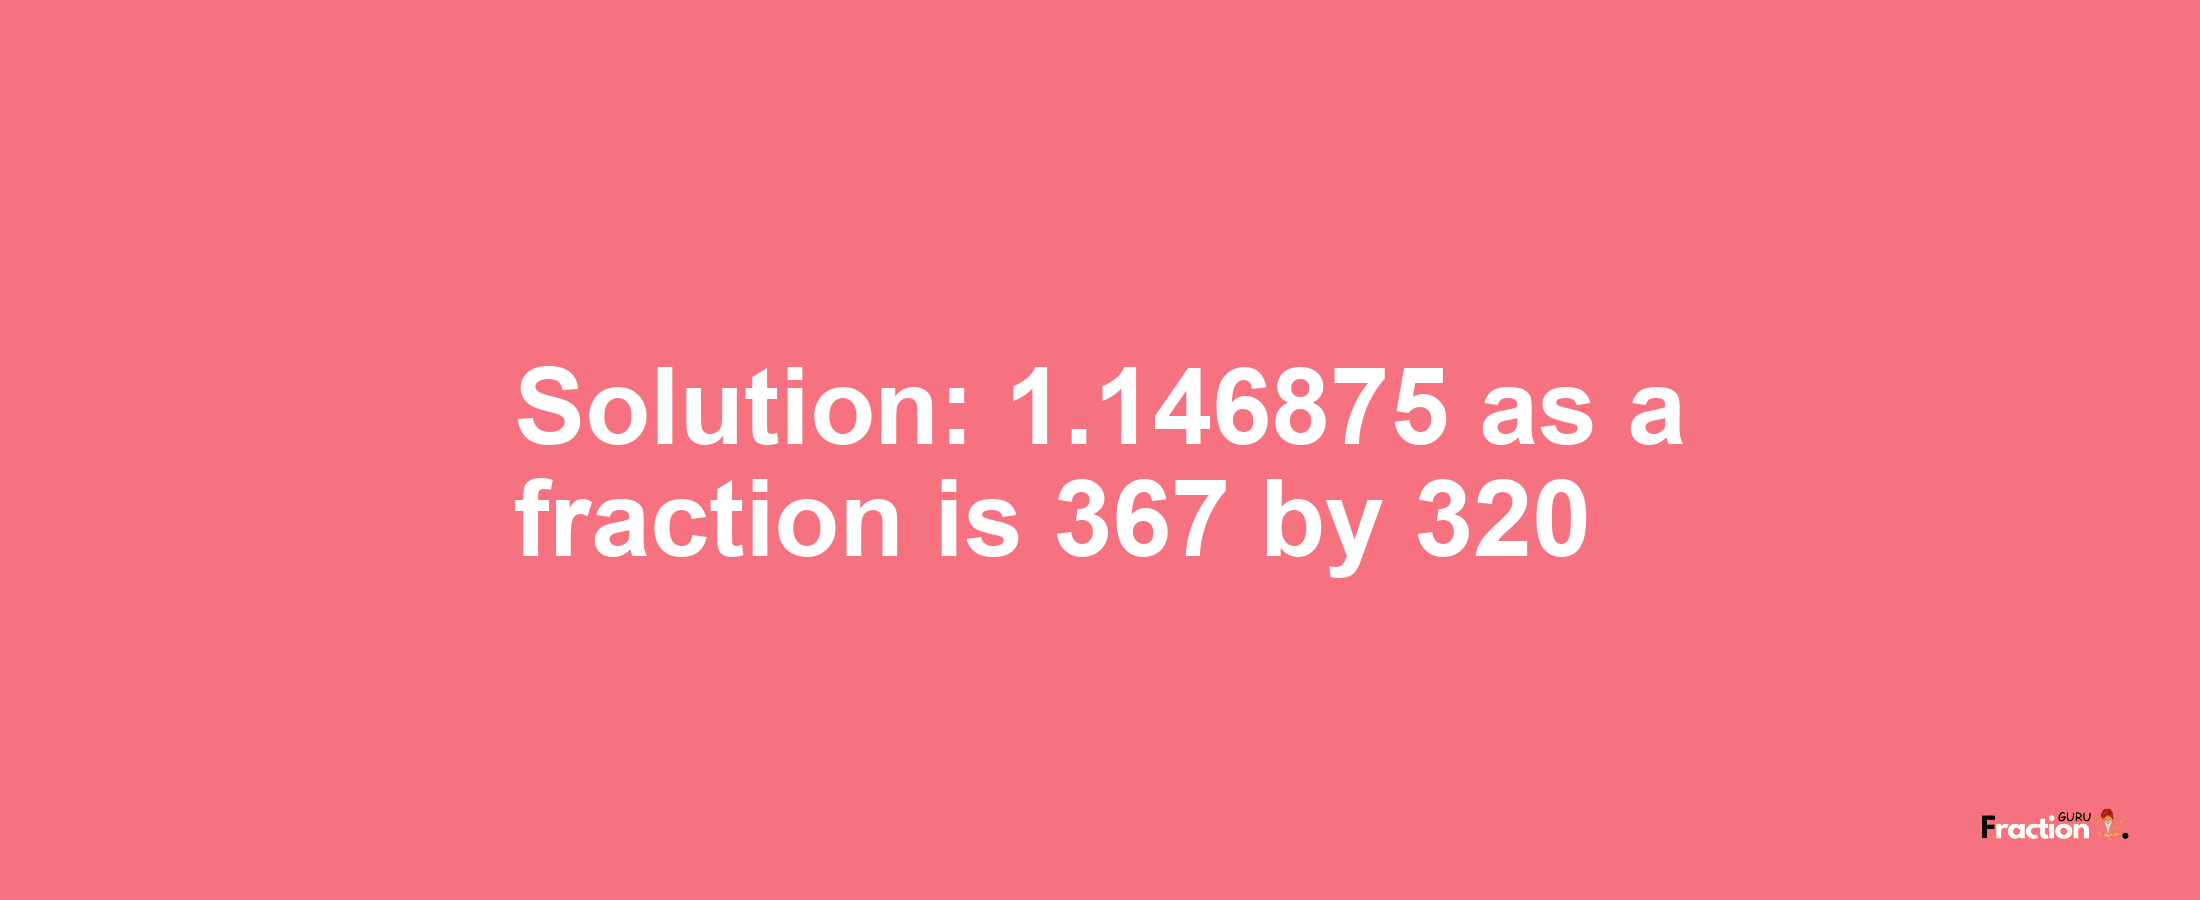 Solution:1.146875 as a fraction is 367/320